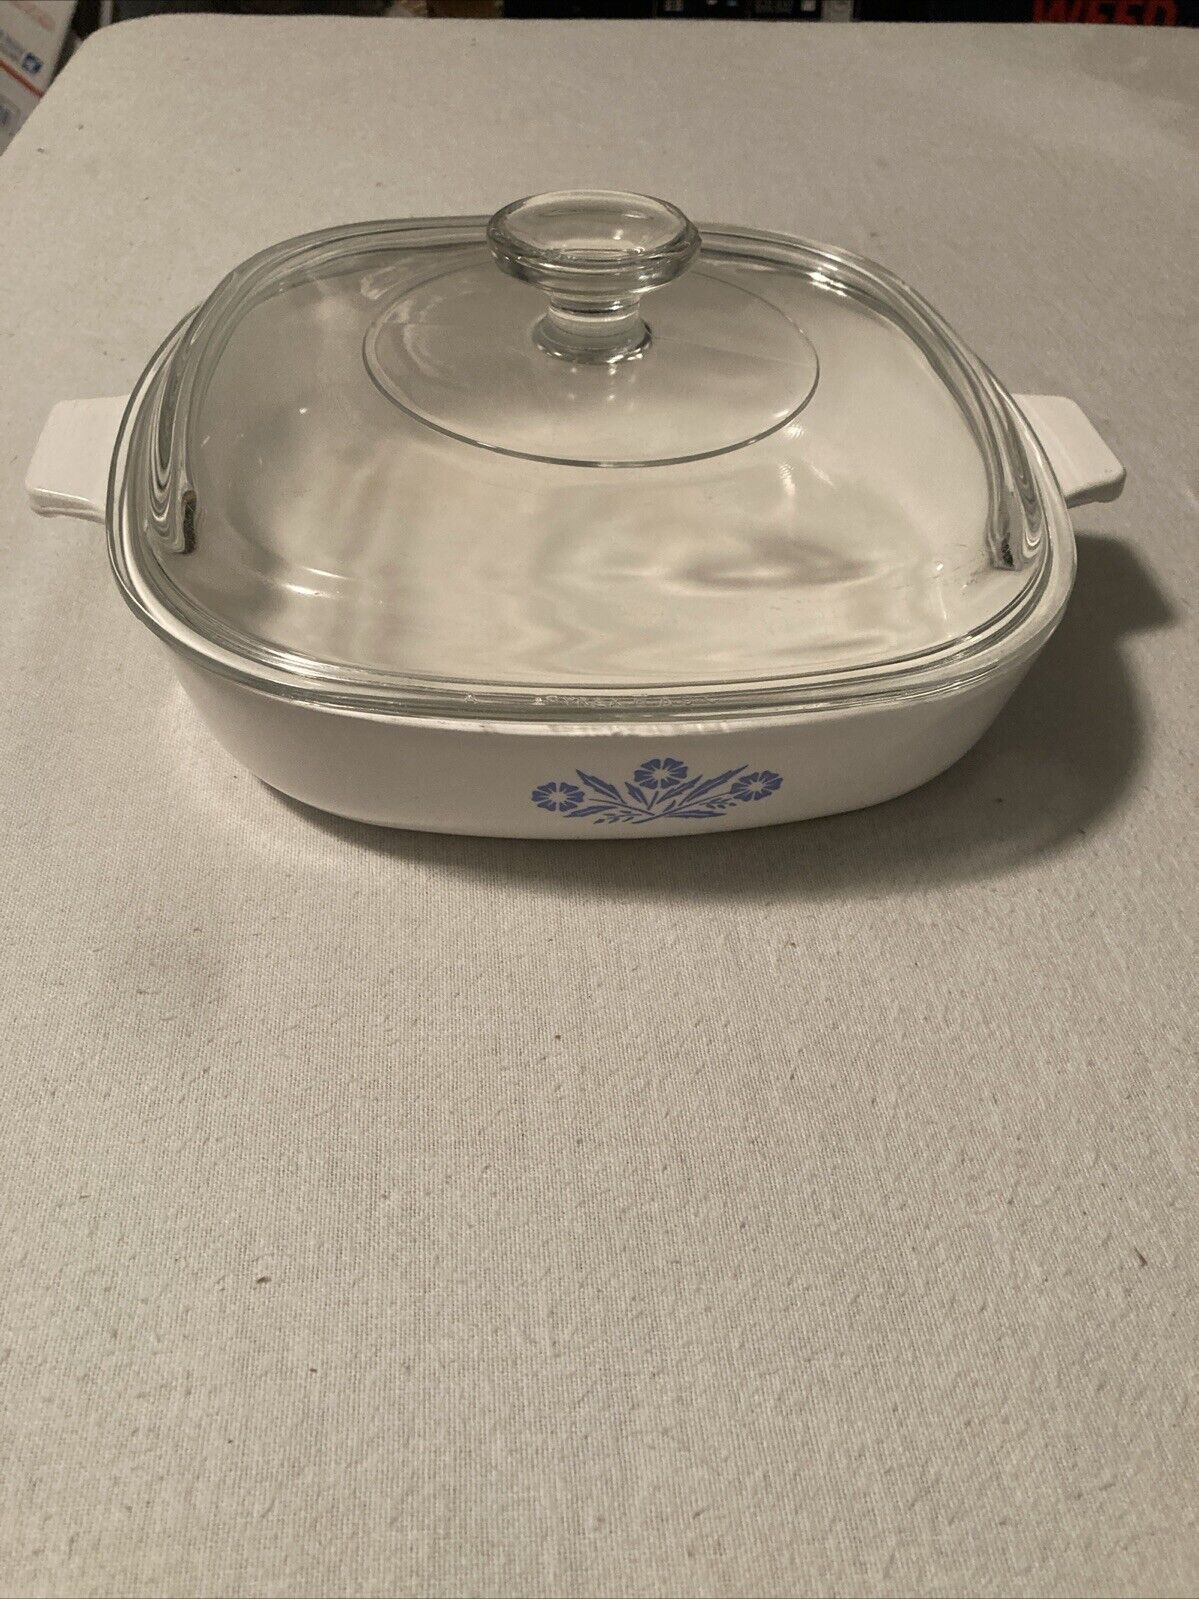 Vintage Corning Ware 9” Cornflower Blue Casserole Dish P-9-B With Lid Pre Owned.